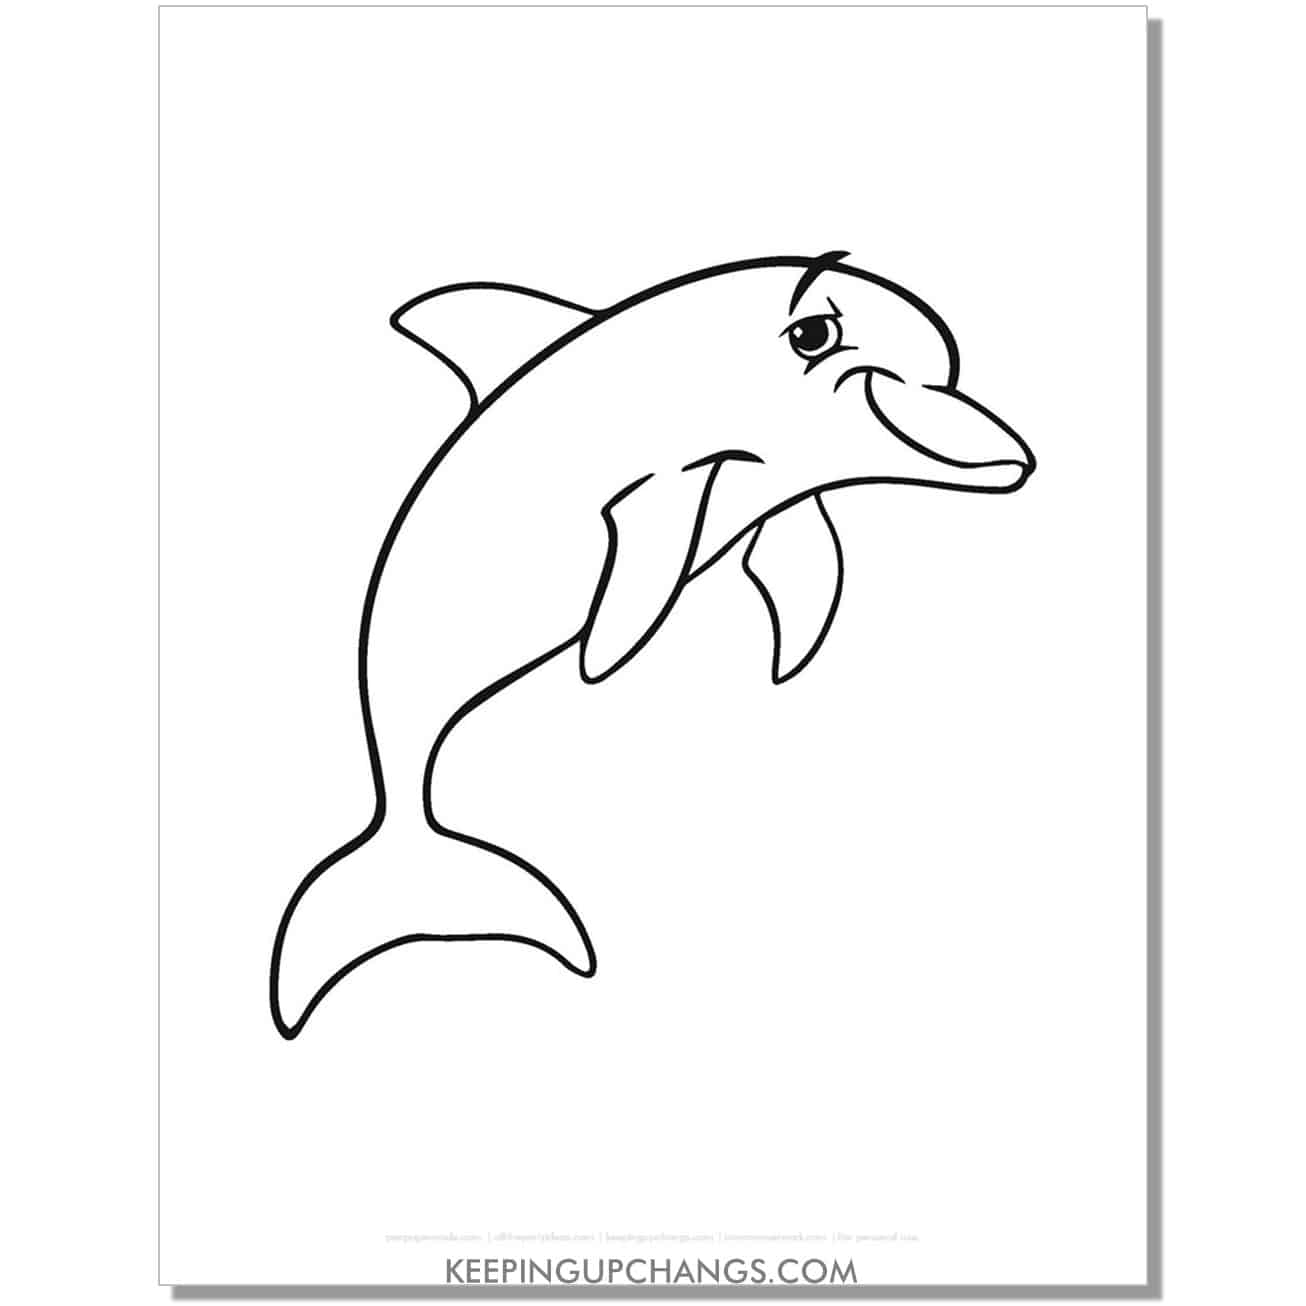 free dolphin with eyebrow coloring page, sheet.